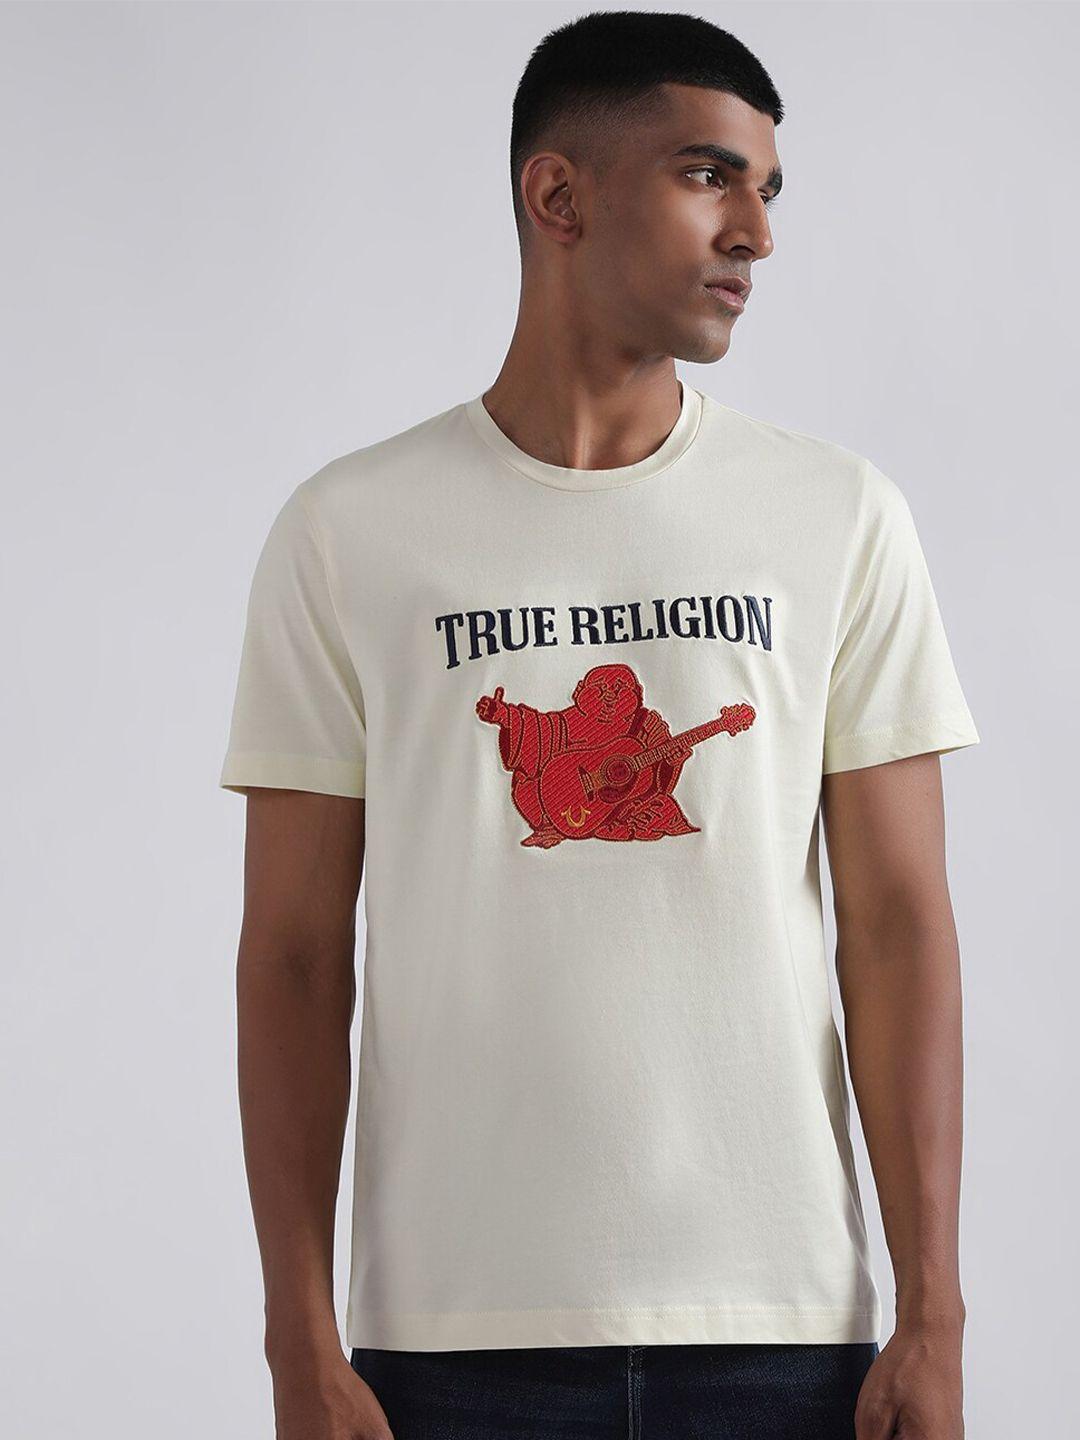 true religion graphic printed short sleeves pure cotton t-shirt